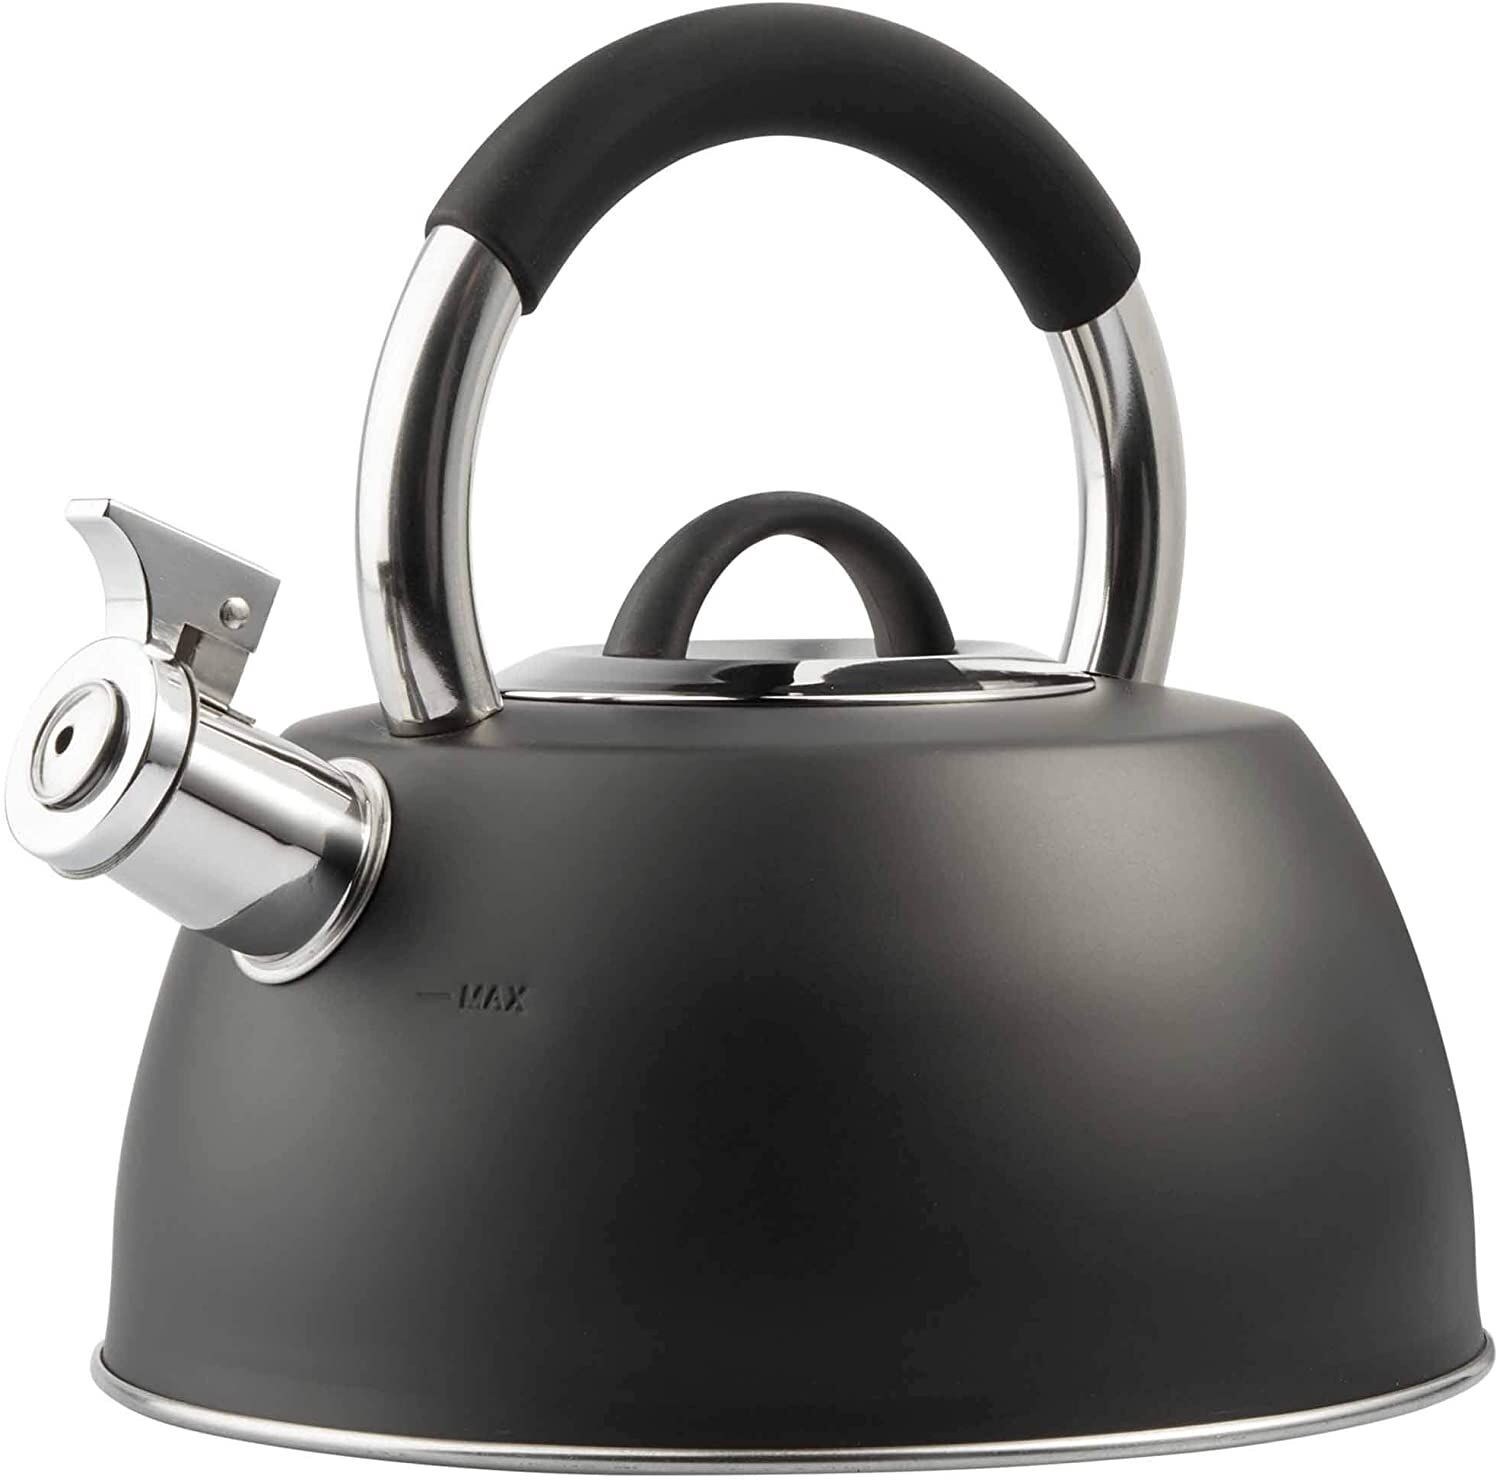 VonShef Stainless Steel Whistling Camping Kettle